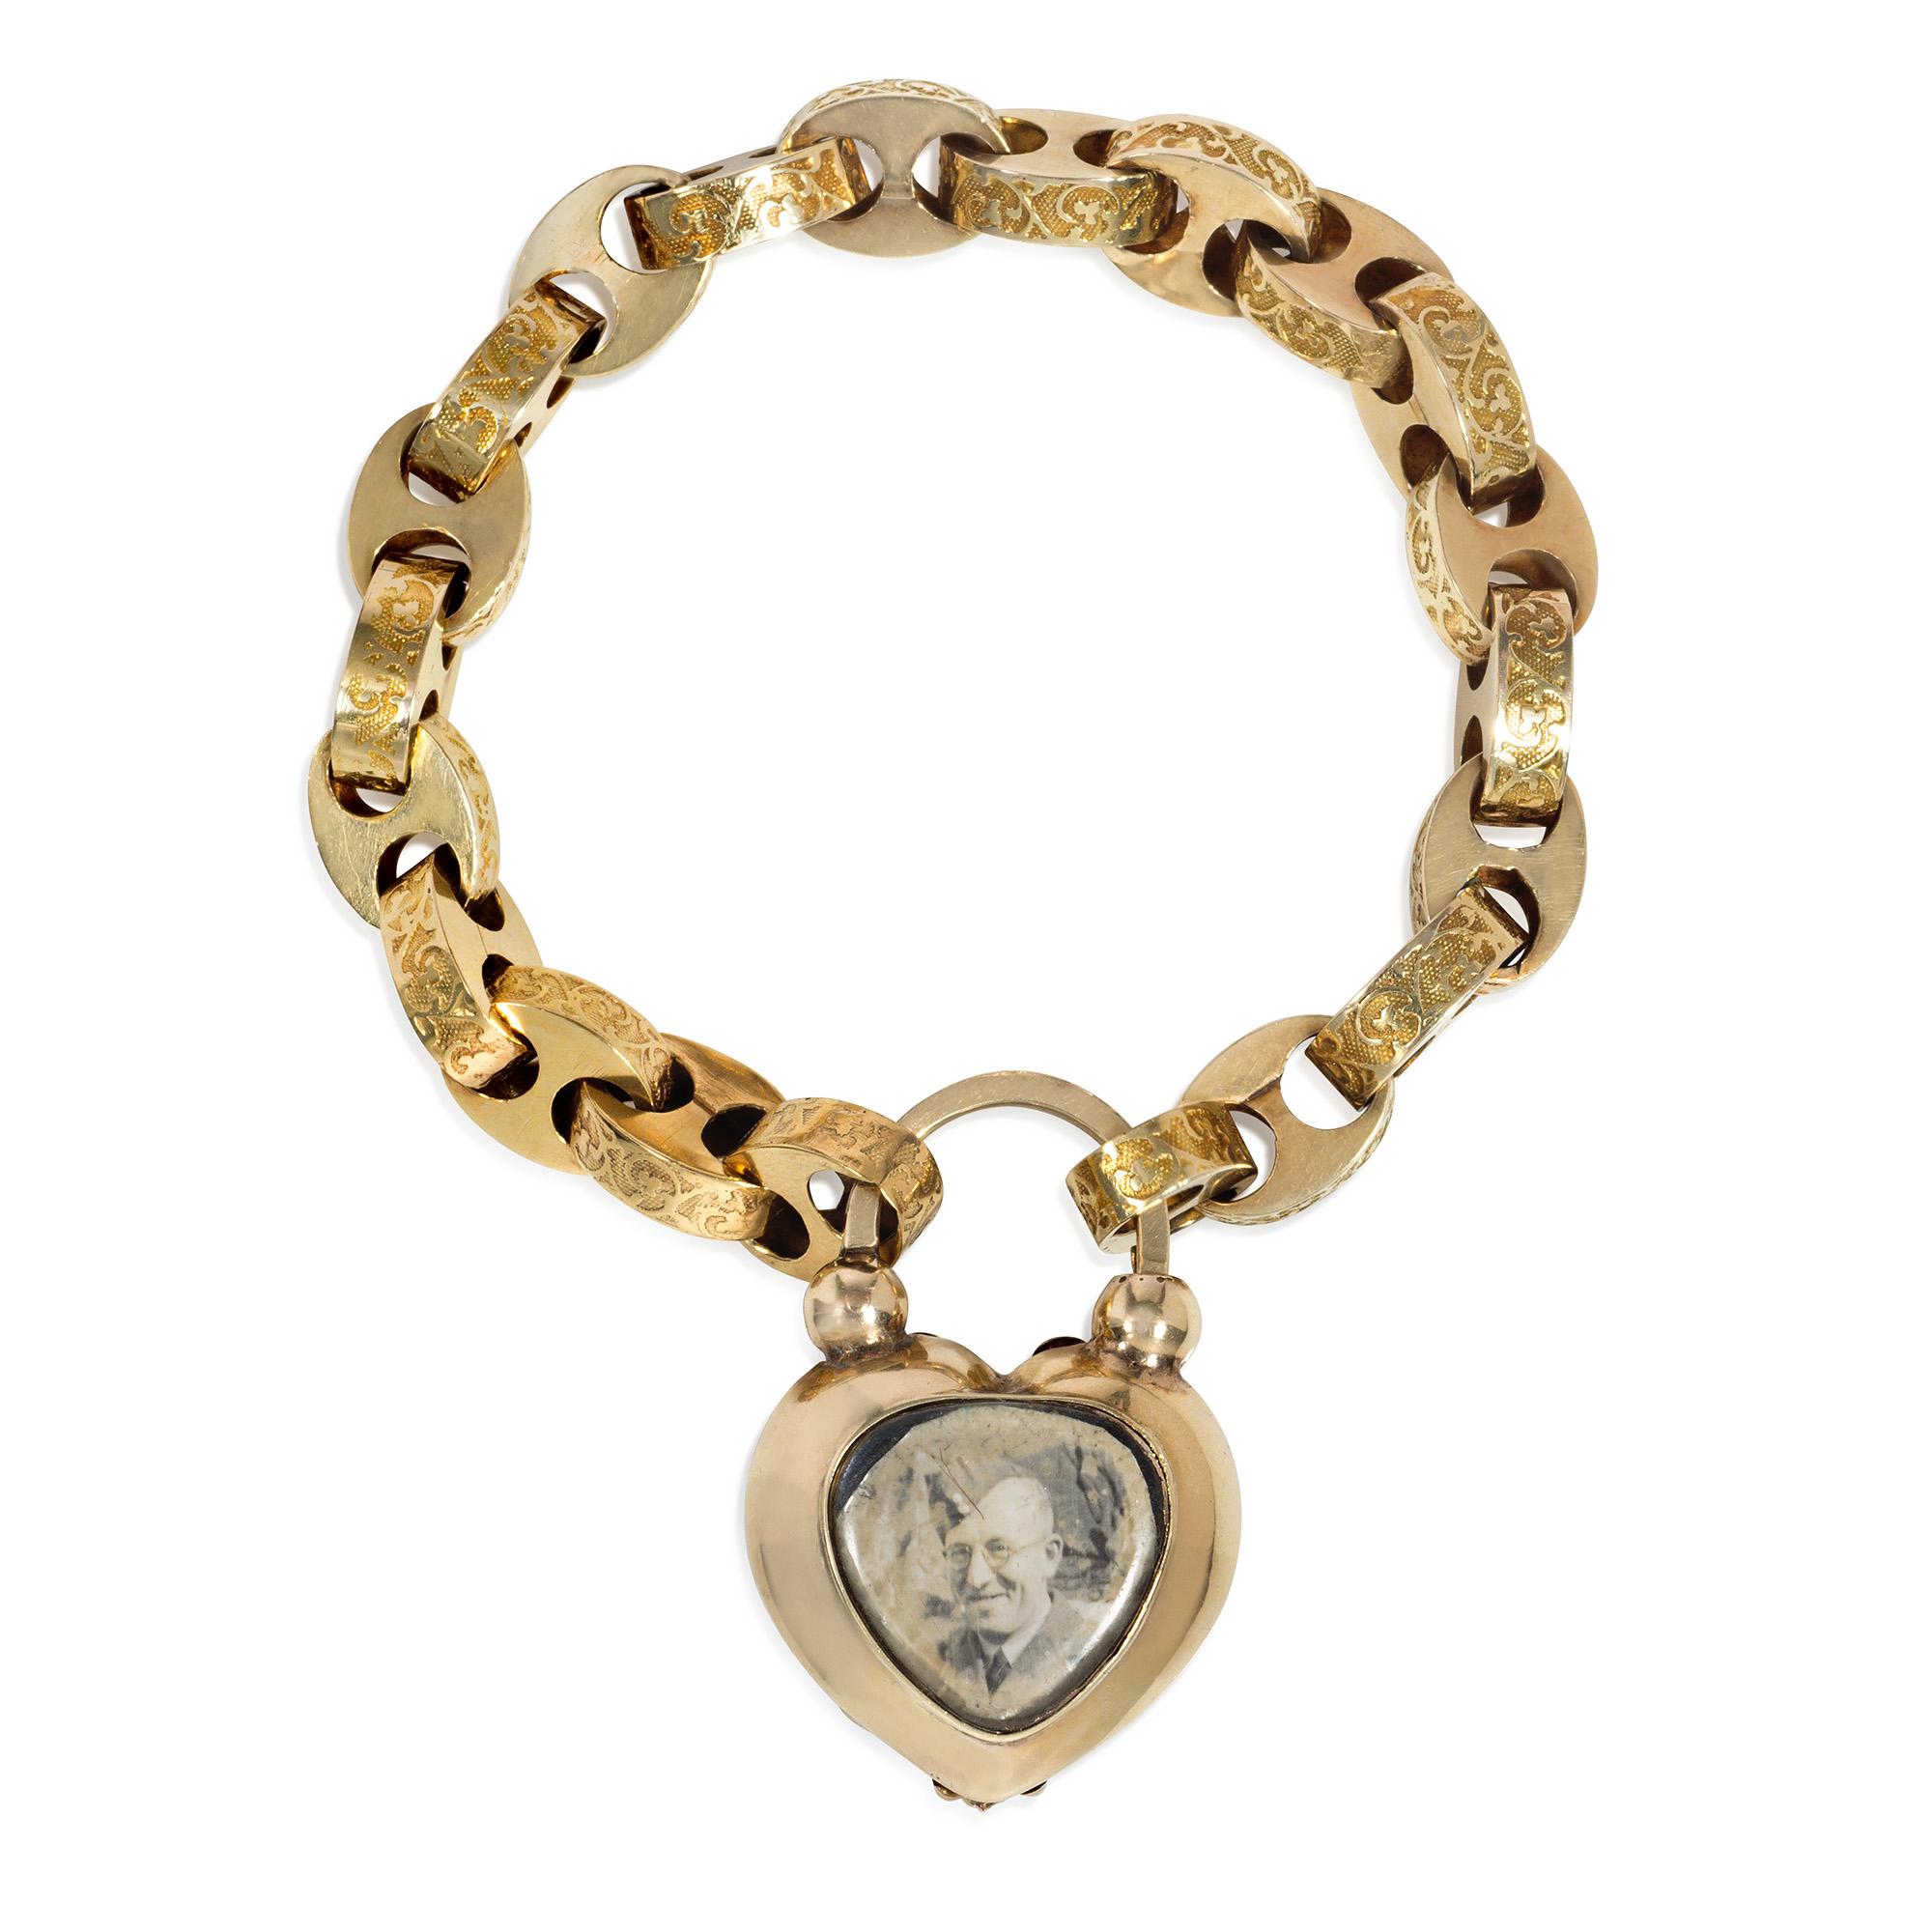 An antique early Victorian topaz and gold belcher link padlock bracelet, the finely chased links decorated with a clover-leaf rinceau over a stippled background, completed by a heart-shaped, locket-back padlock clasp centered by a faceted, ovoid